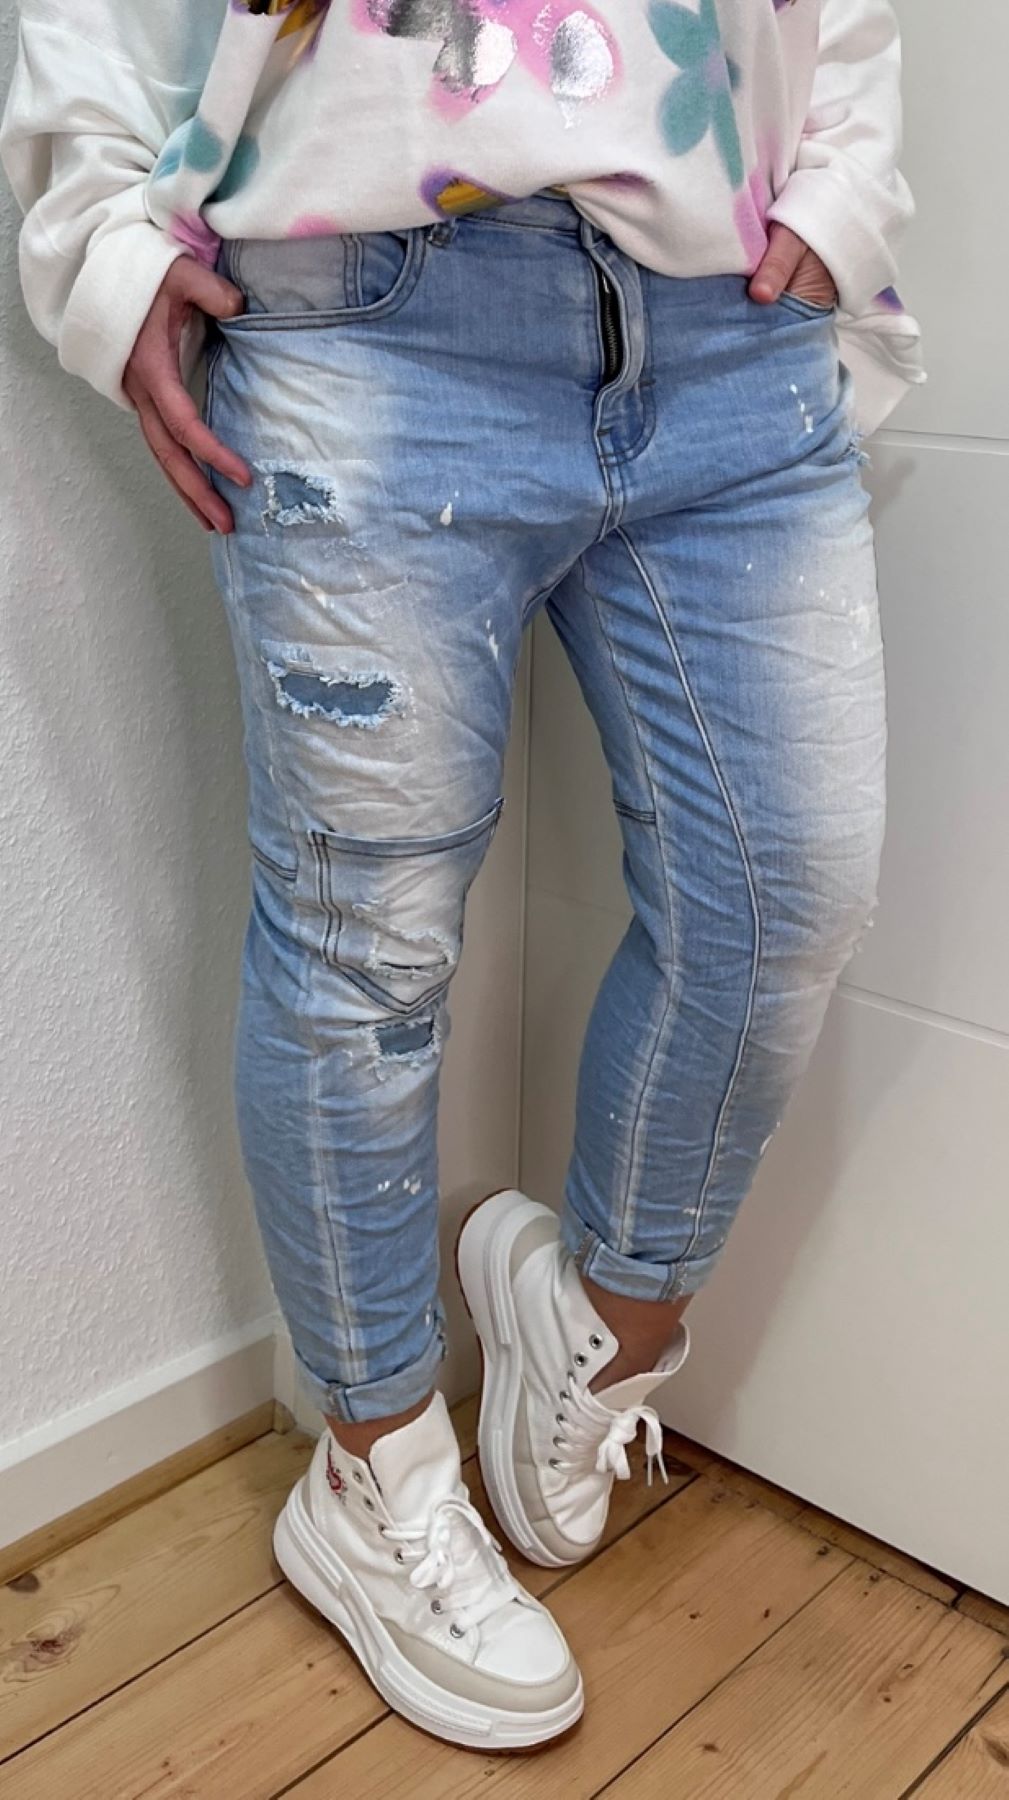 Jeans Trend